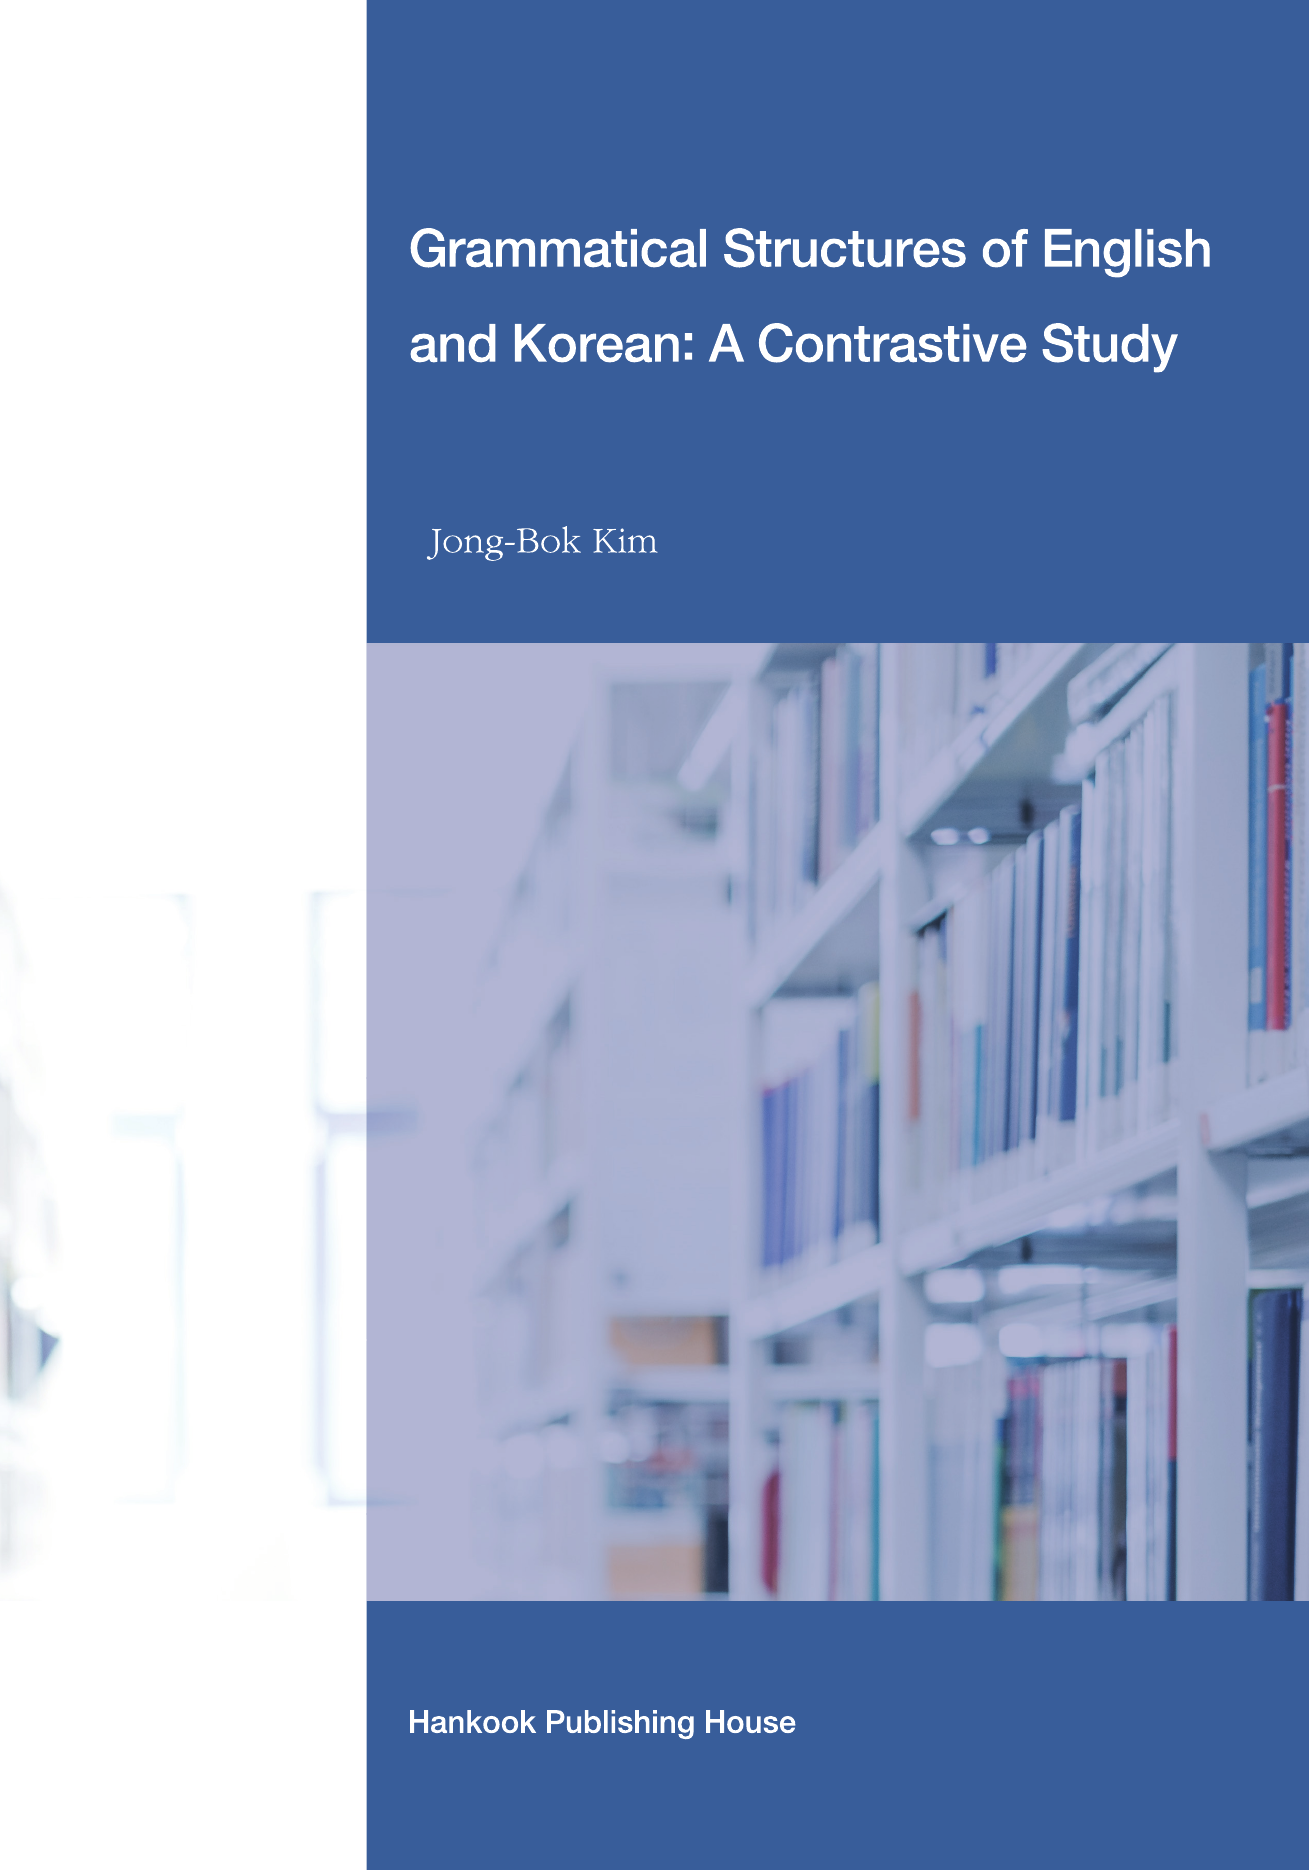 Grammatical Structures of English and Korean: A Contrastive Study